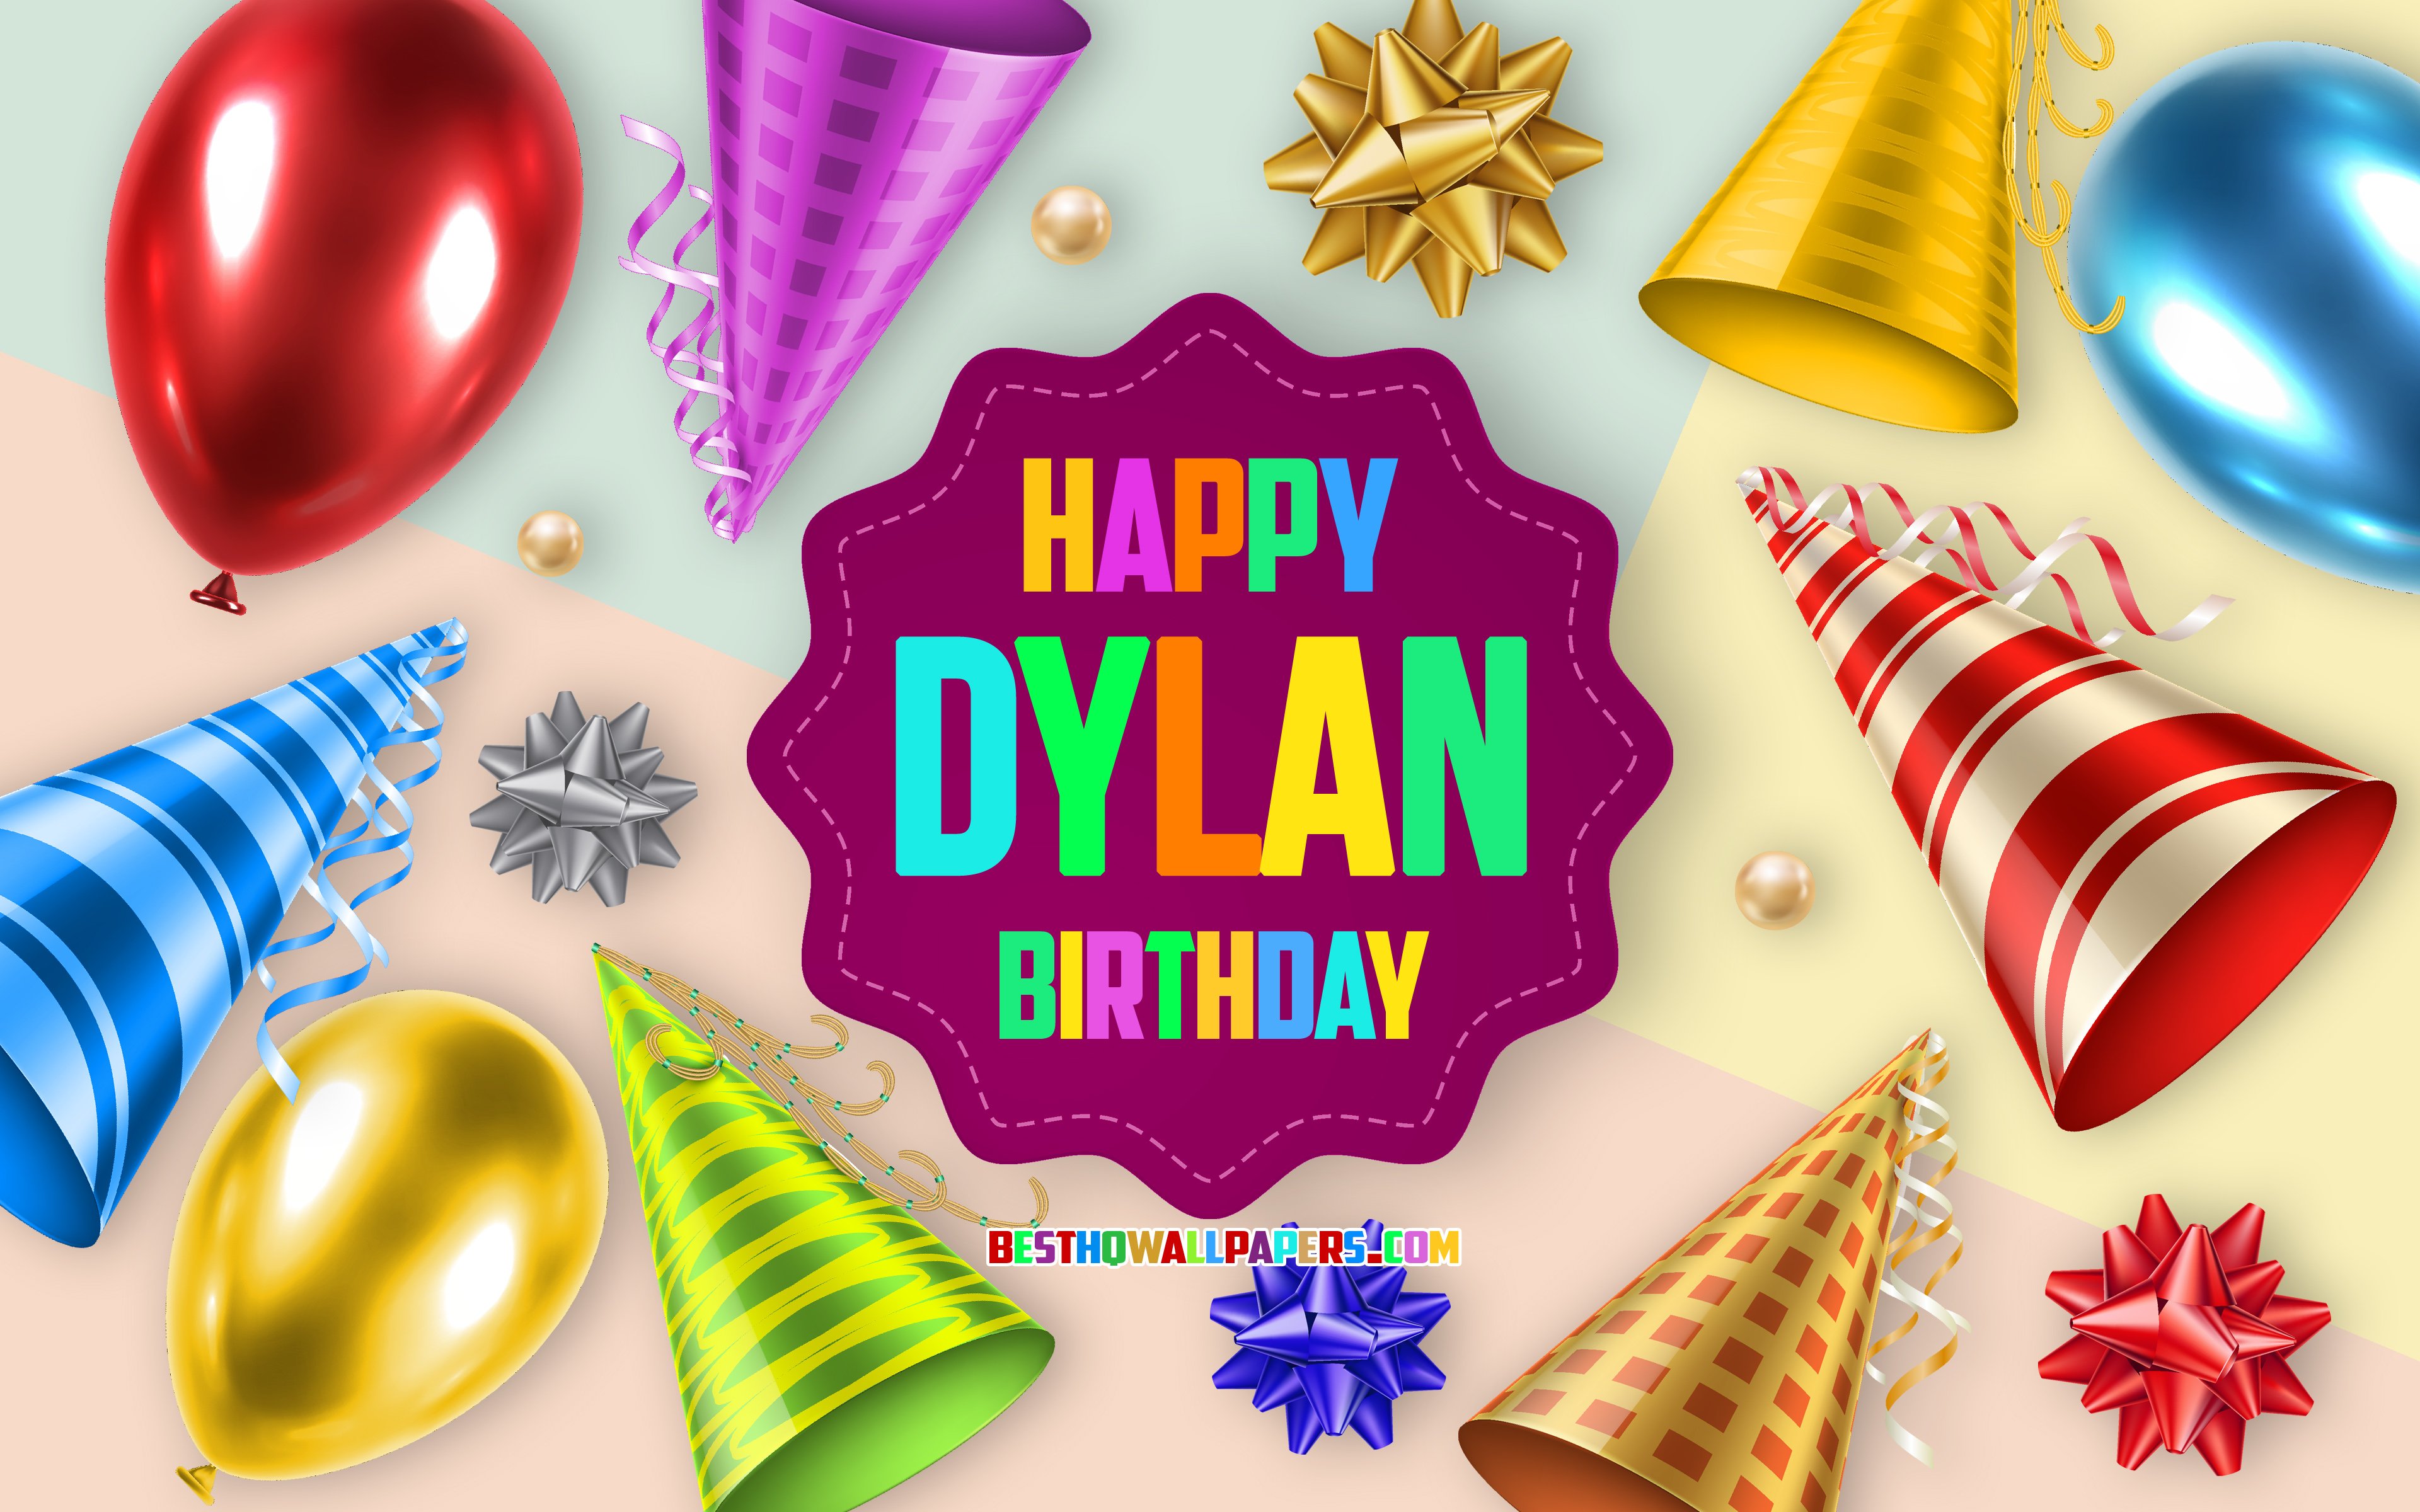 Download Wallpapers Happy Birthday Dylan Birthday Balloon Background Dylan Creative Art Happy Dylan Birthday Silk Bows Dylan Birthday Birthday Party Background For Desktop With Resolution 3840x2400 High Quality Hd Pictures Wallpapers